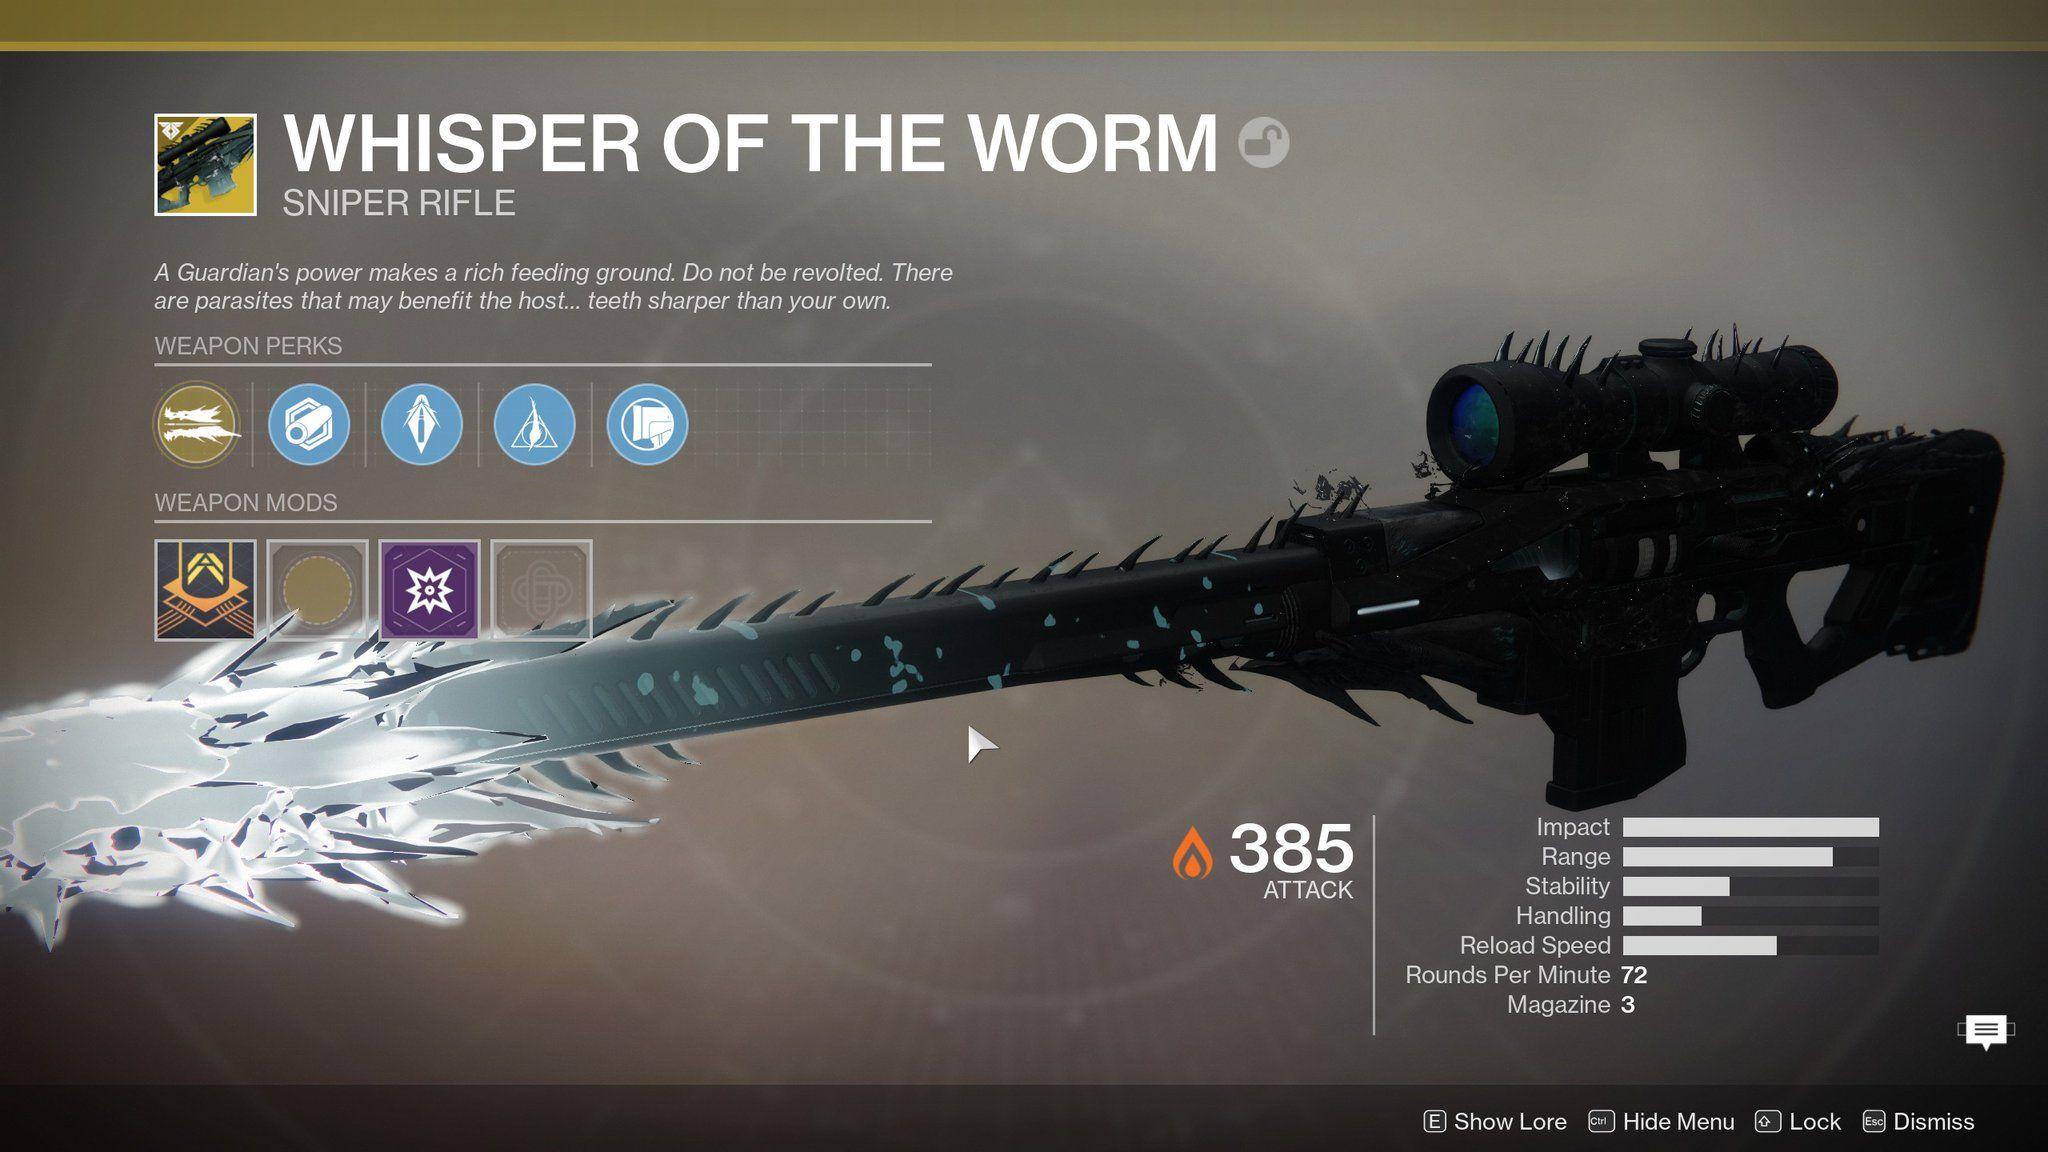 Destiny 2 Black Spindle quest found: Here's what to do